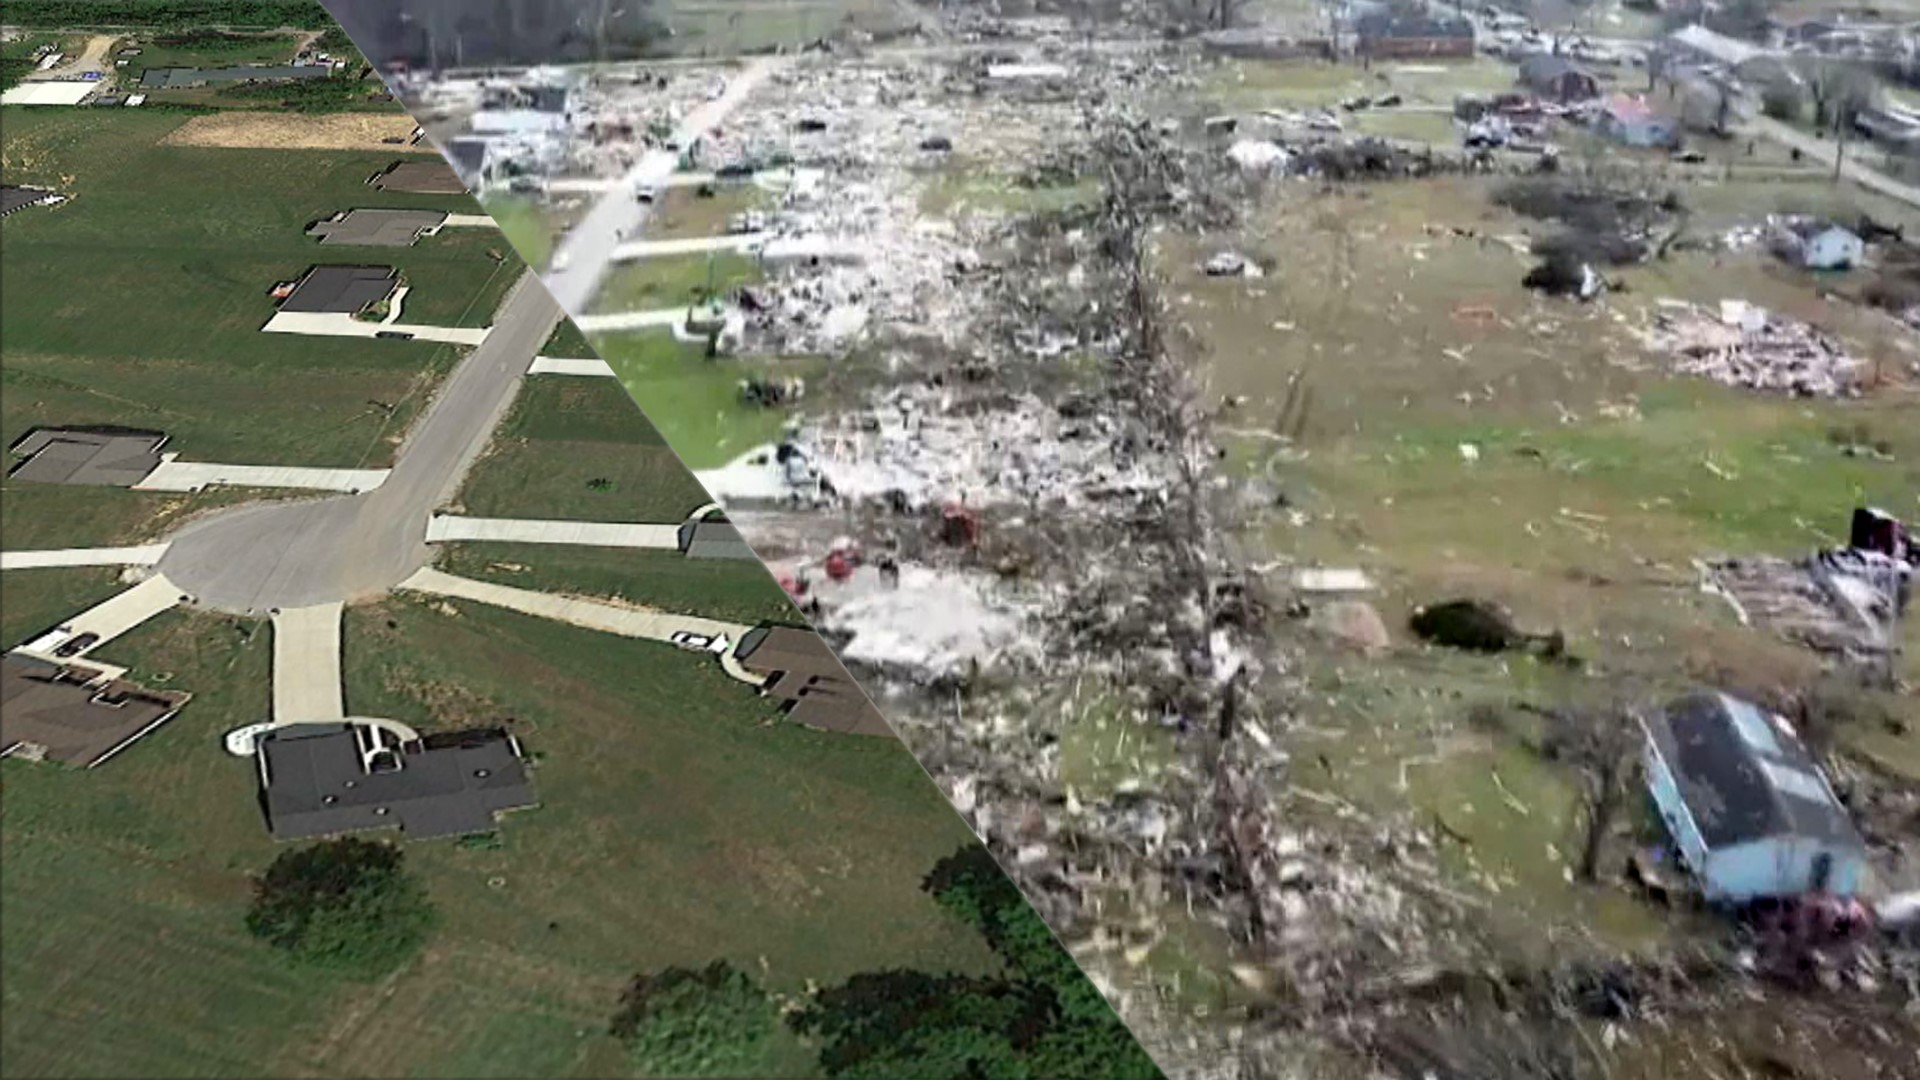 To give context on the power of these tornadoes, it helps to know what these neighborhoods looked like just a few days ago.